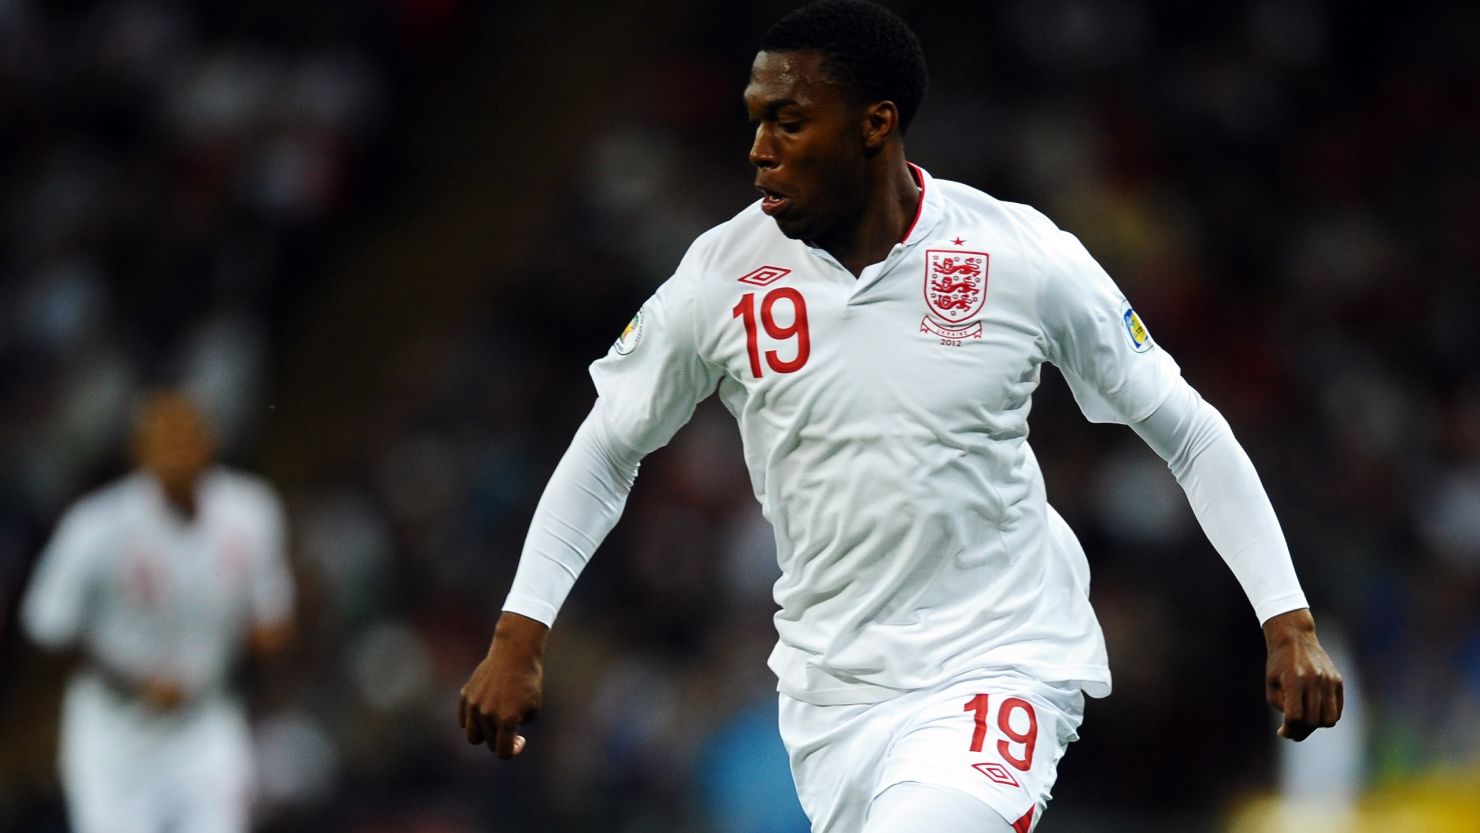 England international Daniel Sturridge has completed his $19.6 million move from Chelsea to Liverpool.